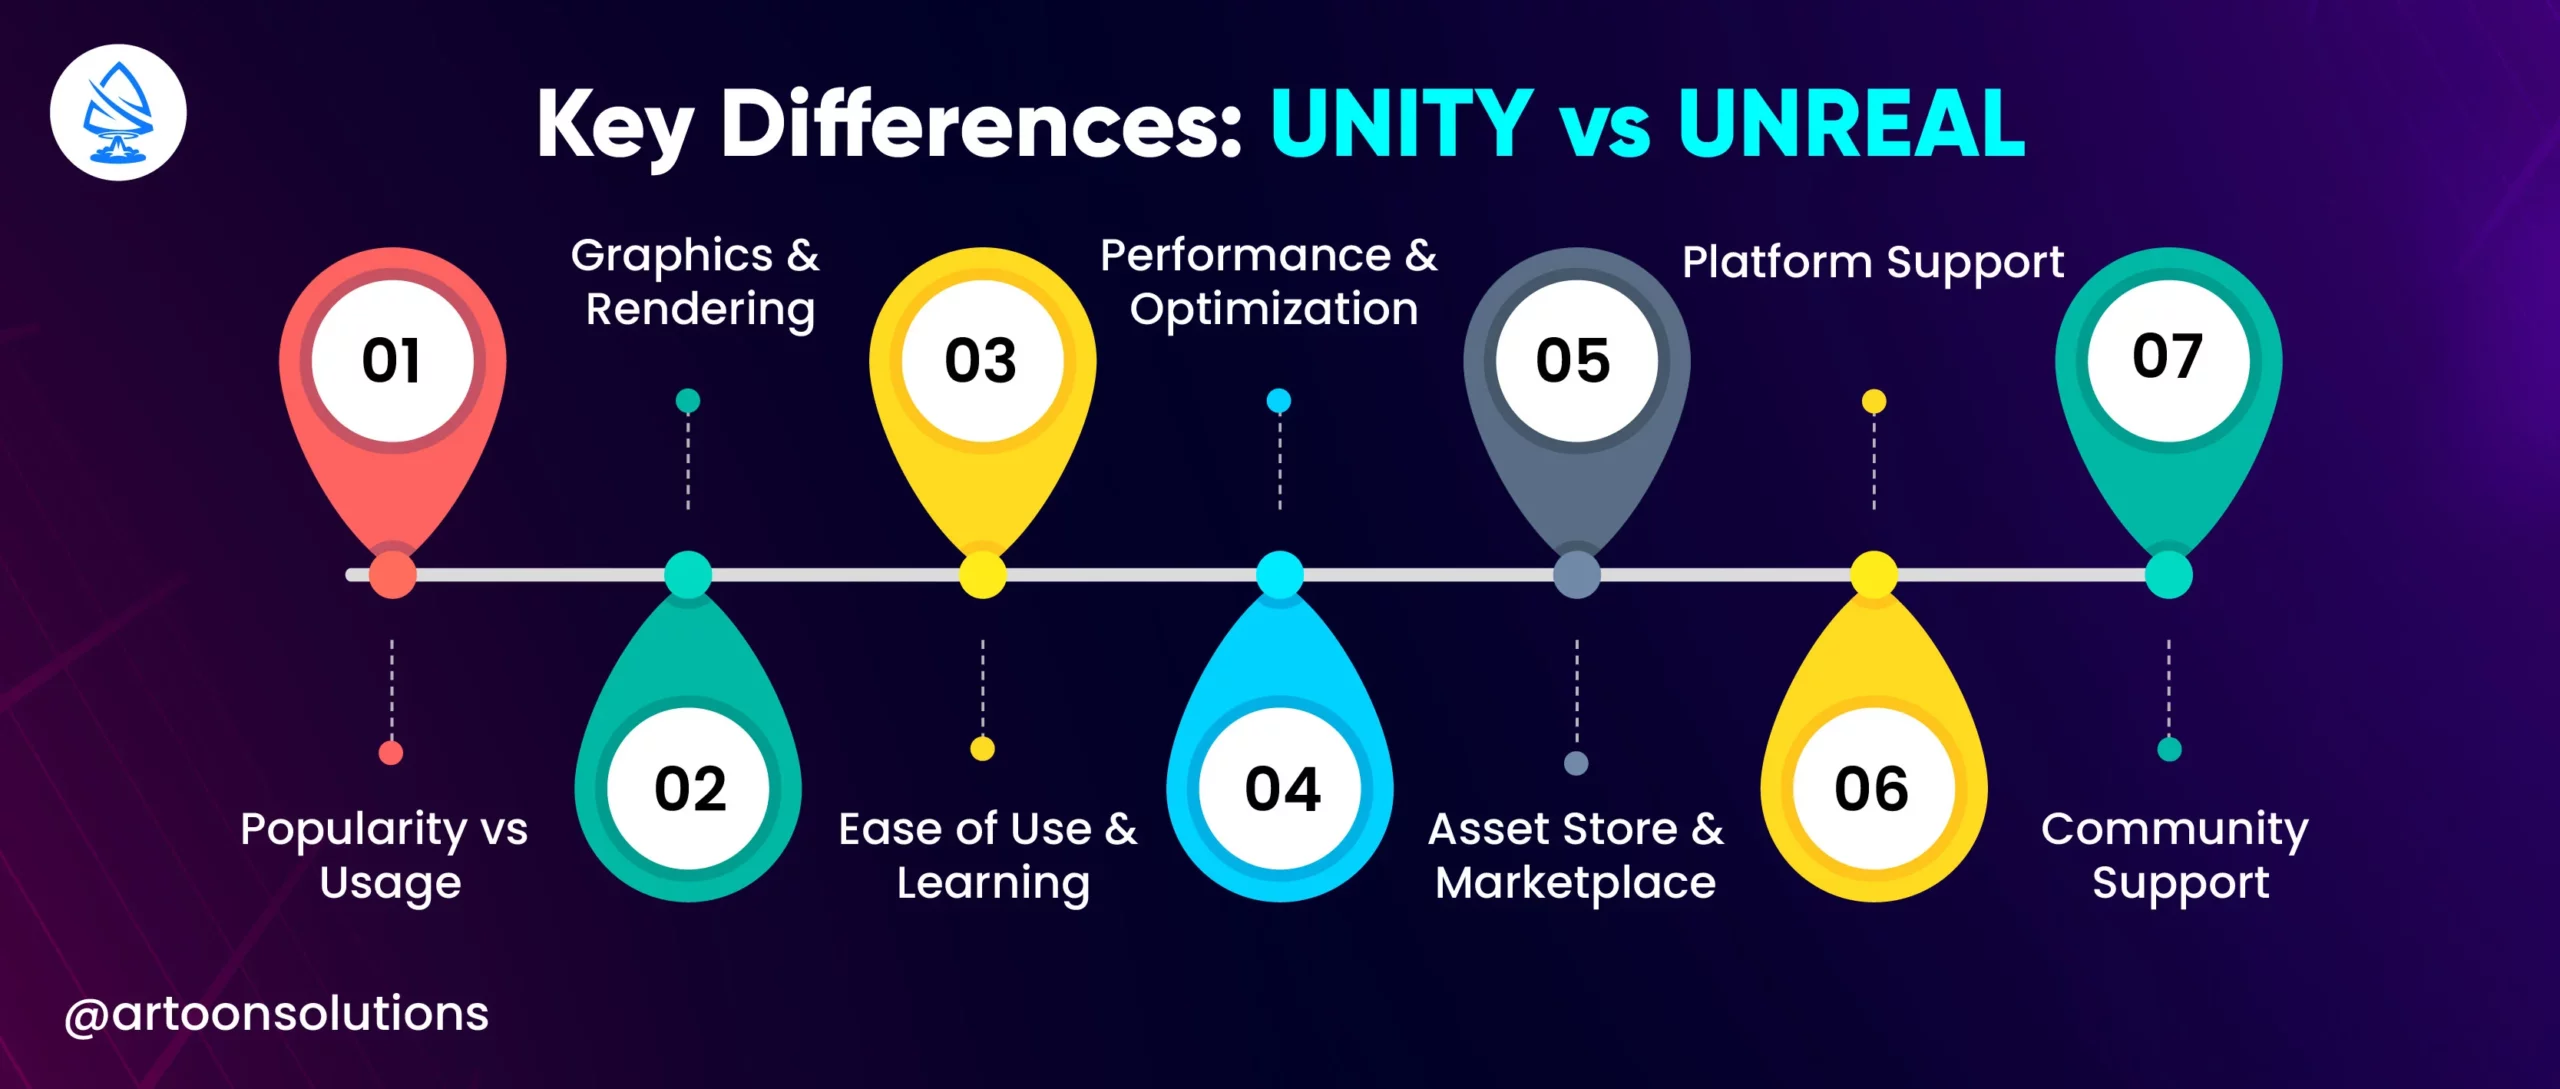 Key Differences: Unity vs Unreal